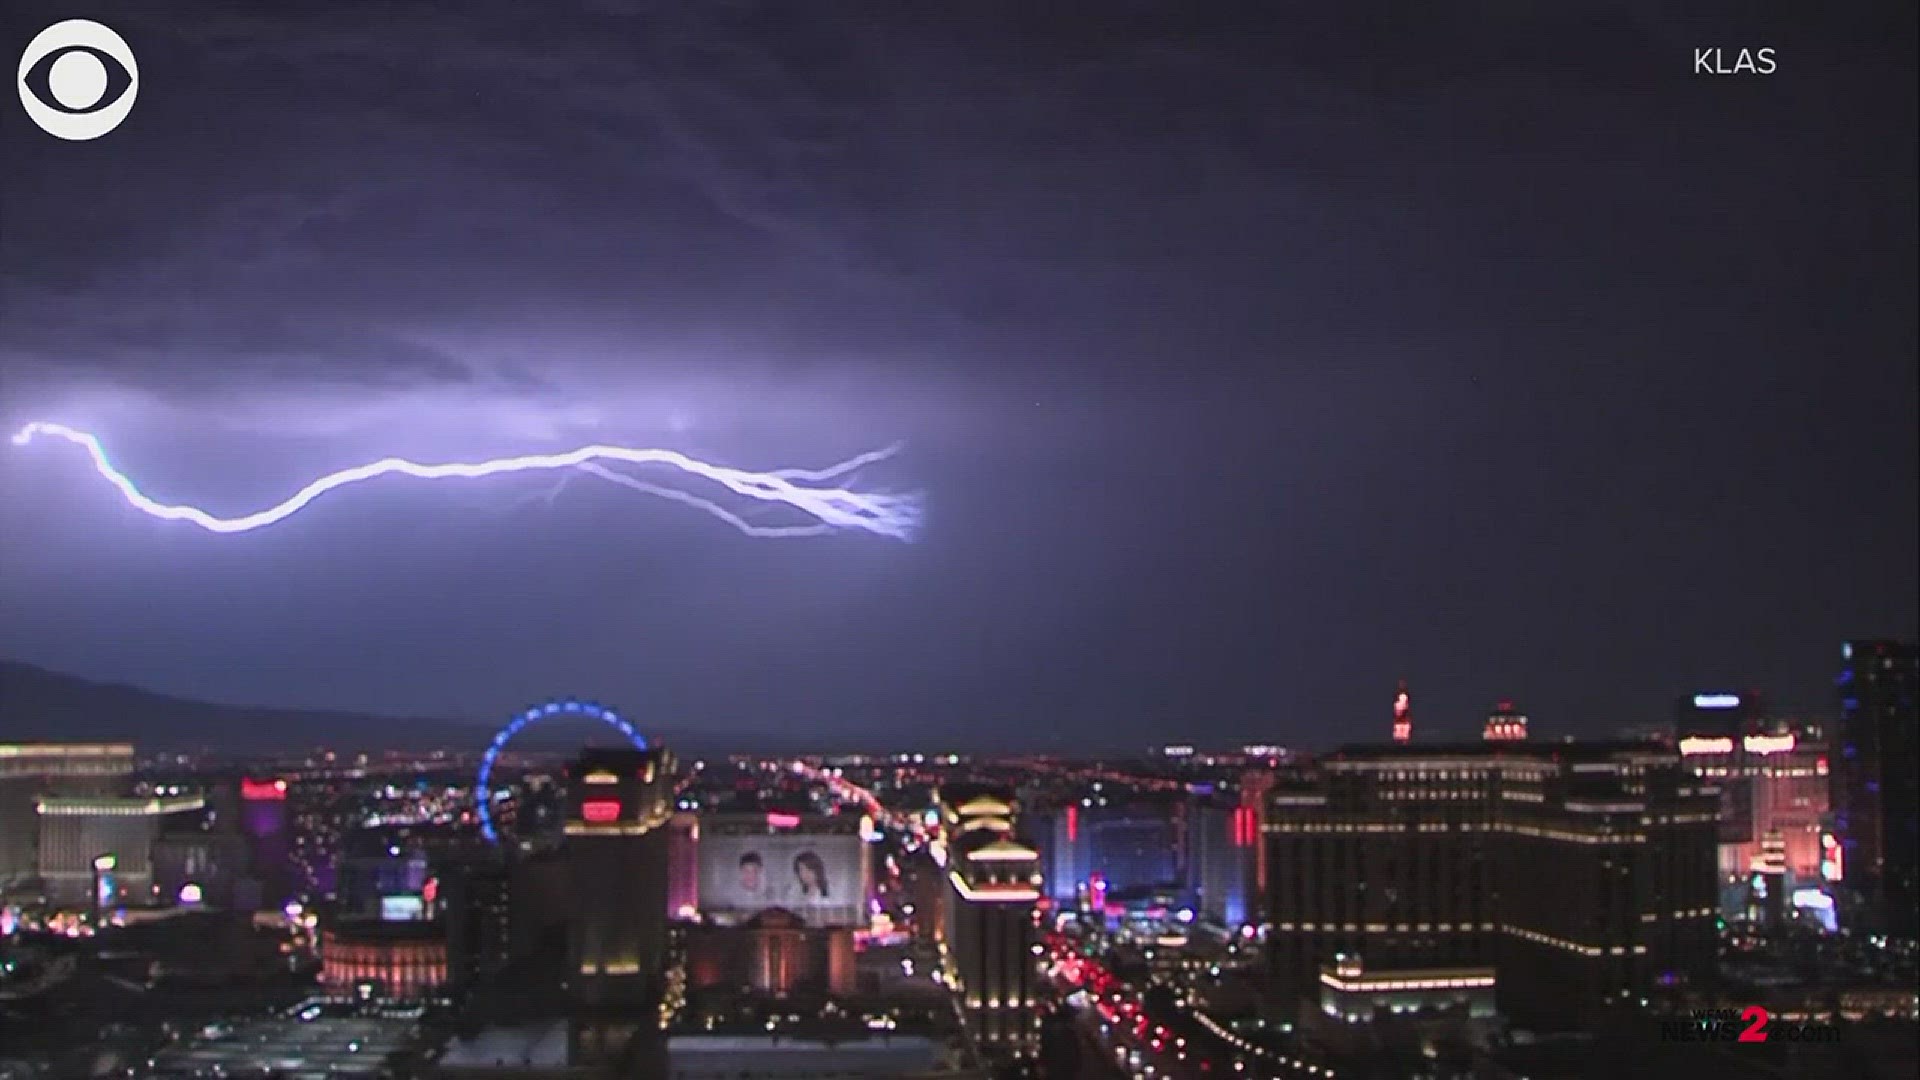 Lightning bolts lit up the sky in Vegas! Check it out as lightning was spotted along the Las Vegas Strip.